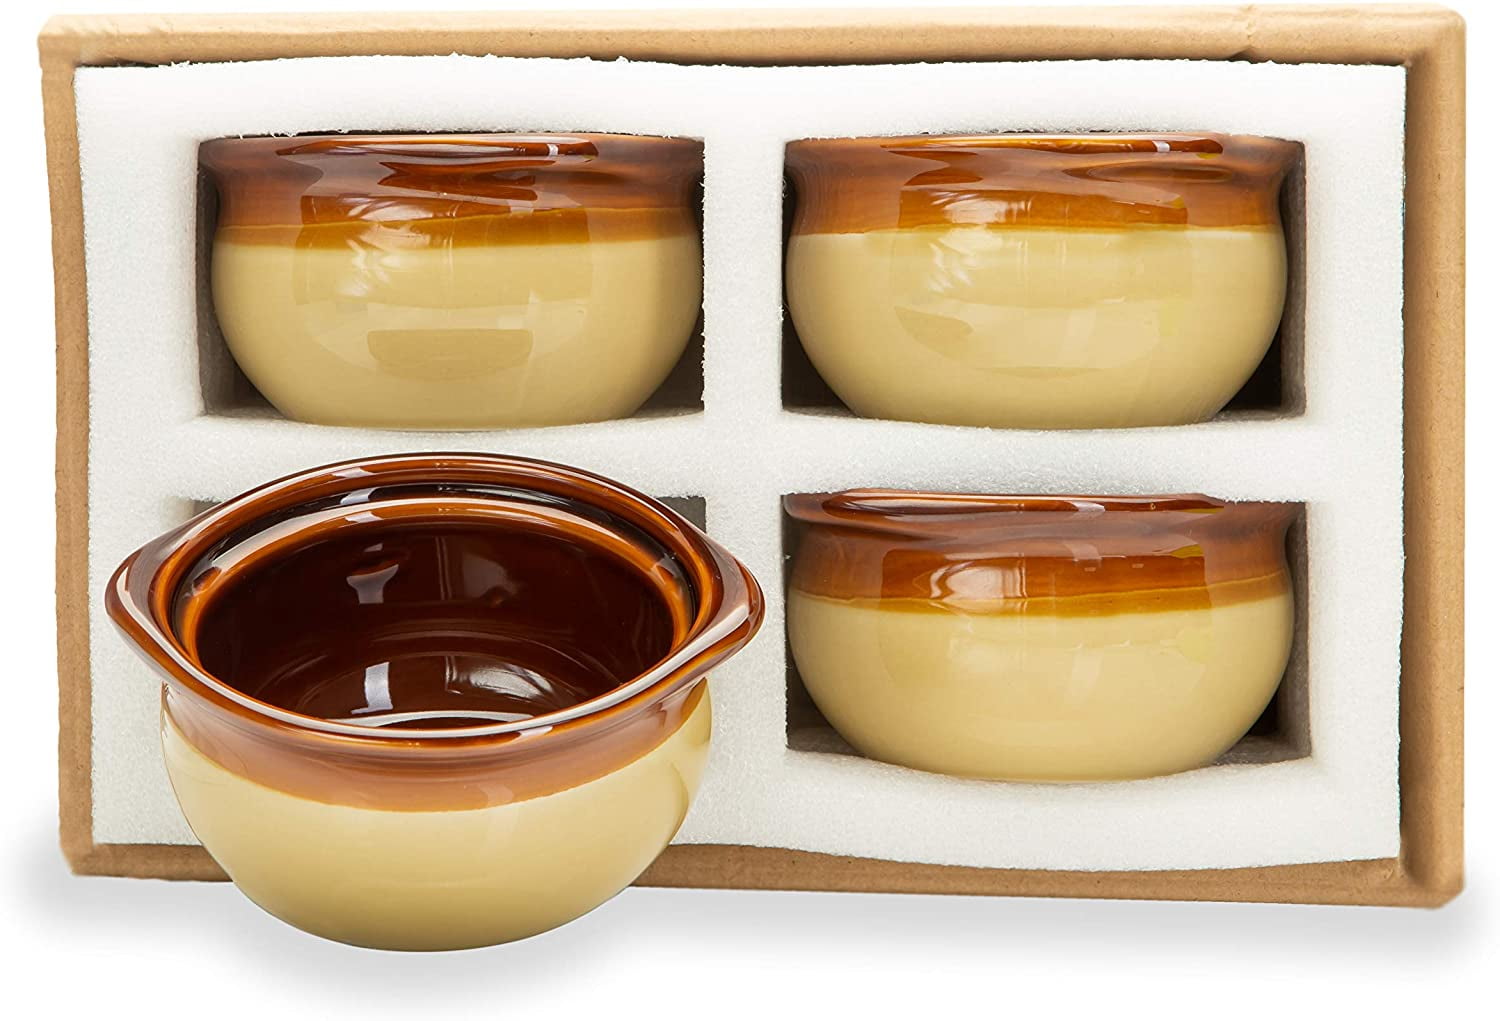 CAC OC-12-C Brown and Ivory 12 oz. Onion Soup Crock / Bowl - 24 / Case